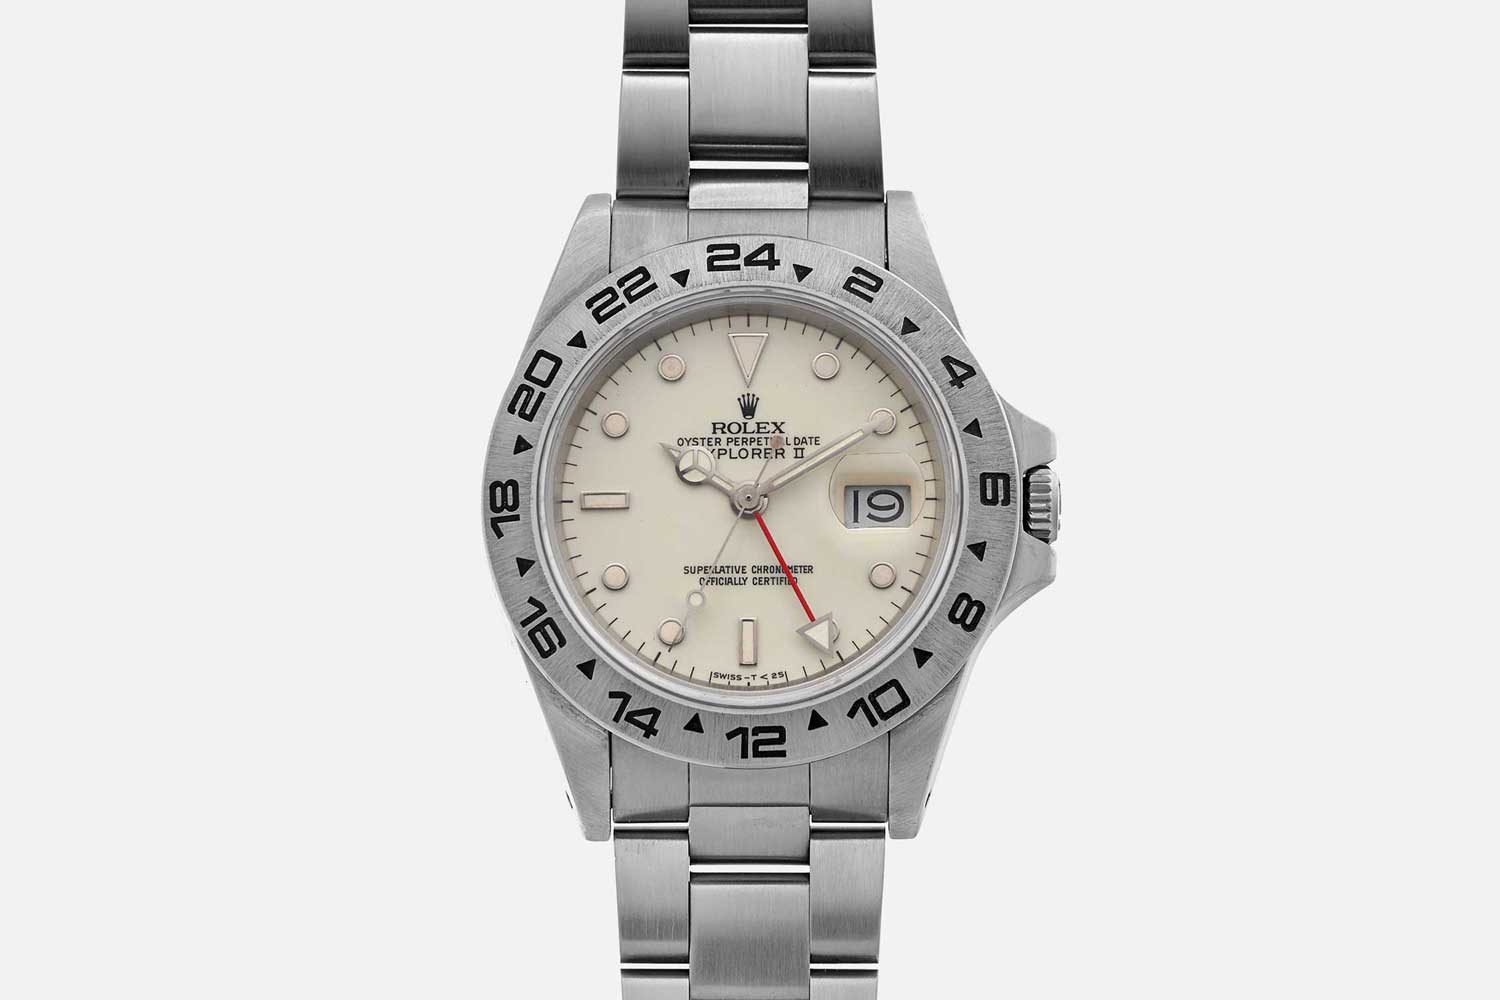 The 16550 is probably the most important Explorer II in that this was the watch that ushered in everything that we now associate with this model.